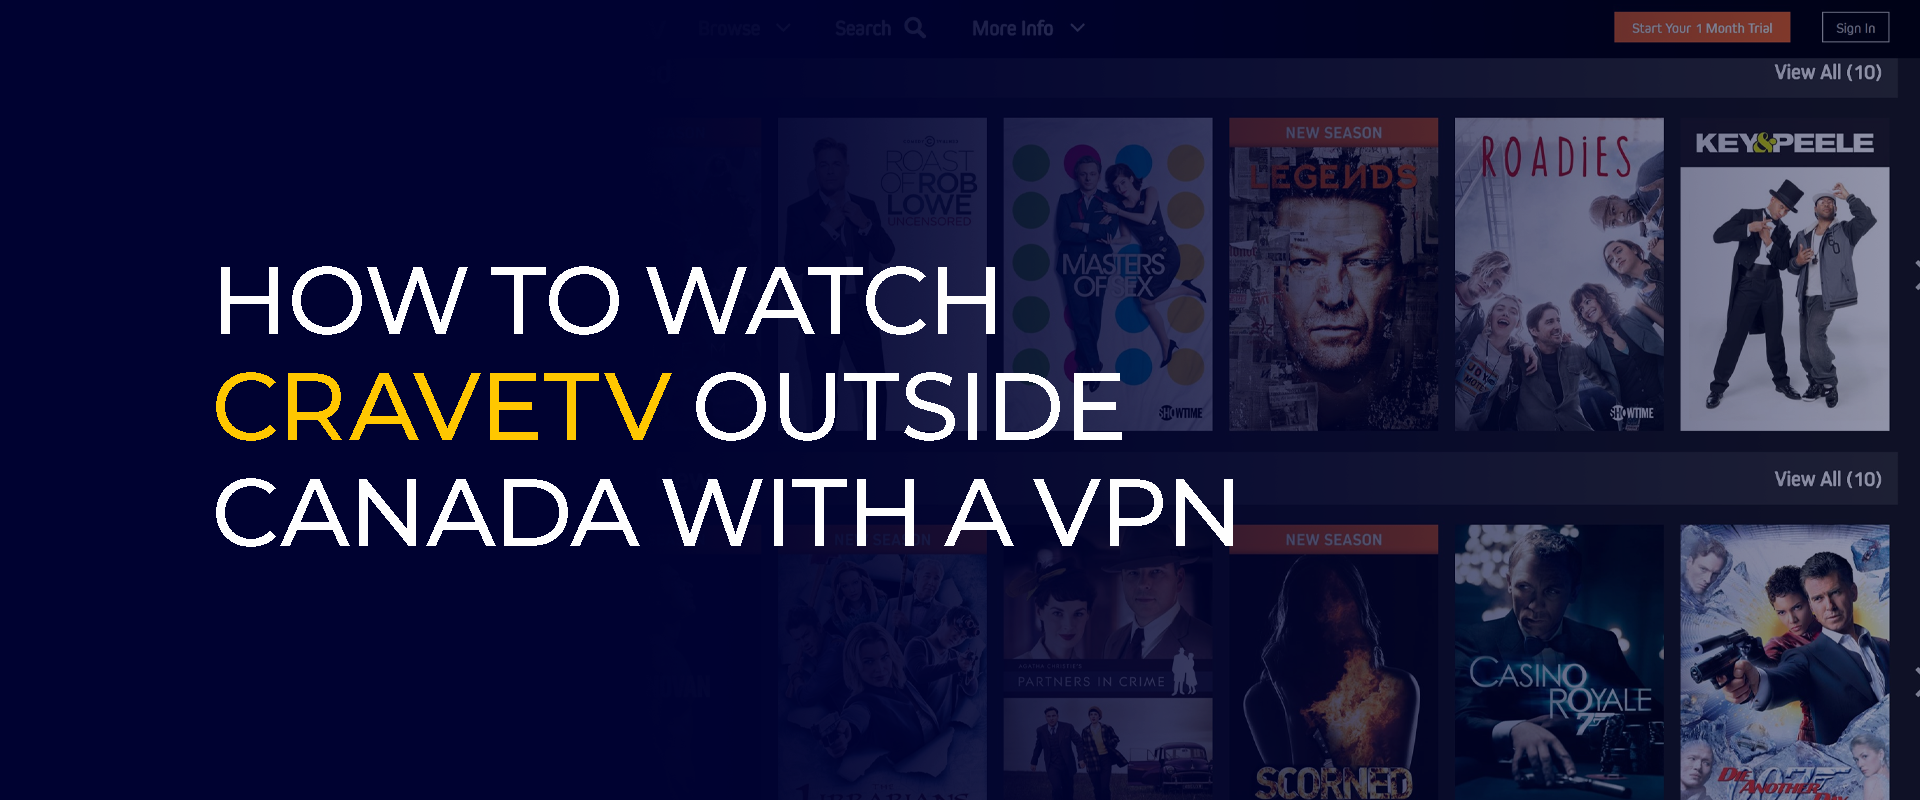 How to Watch CraveTV Outside Canada with a VPN